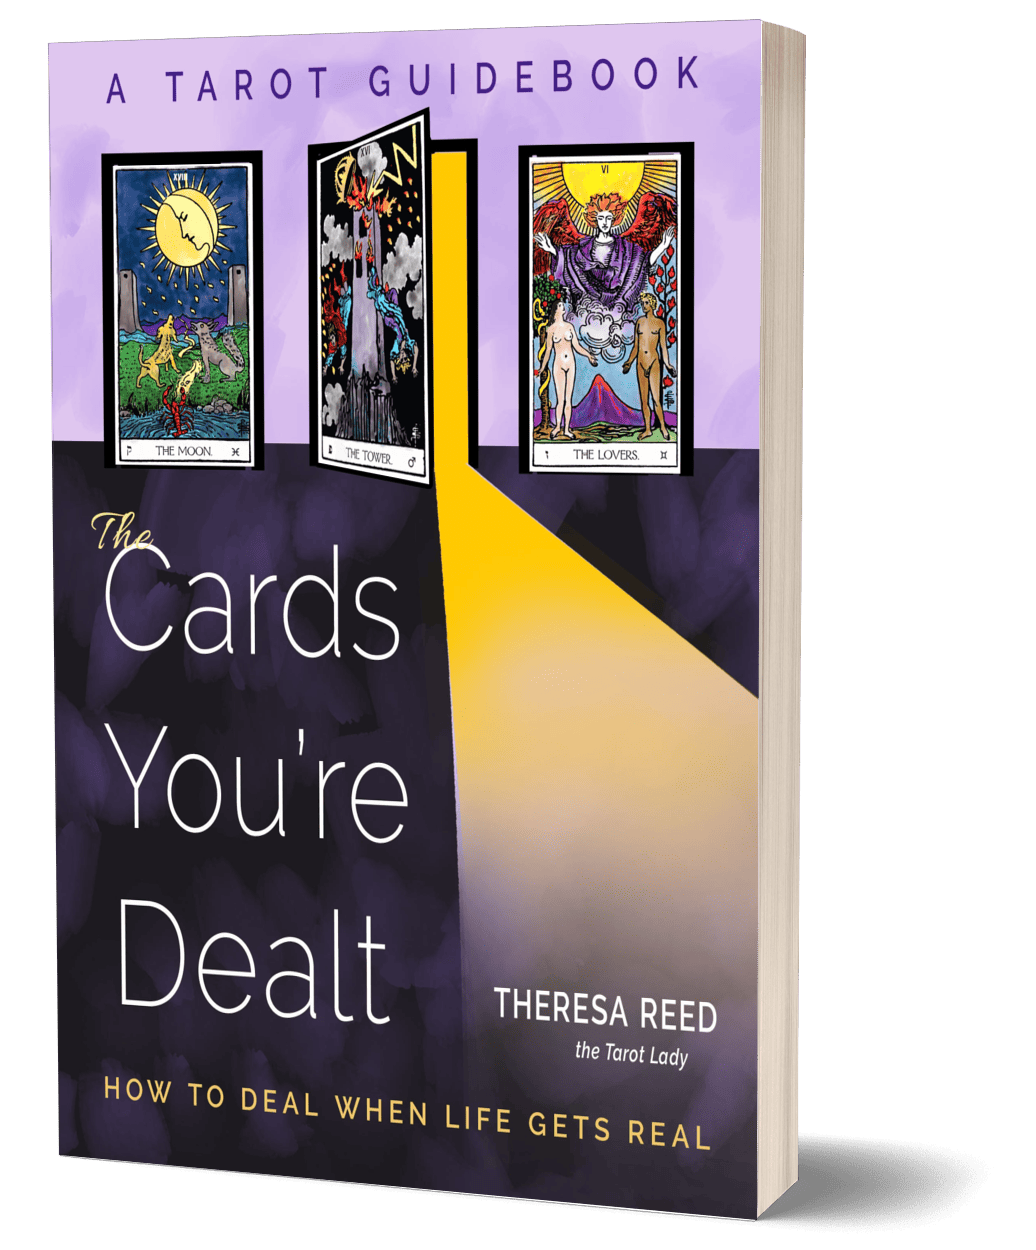 The Cards You're Dealt - How To Deal When Life Gets Real by Theresa Reed - A Tarot Guidebook